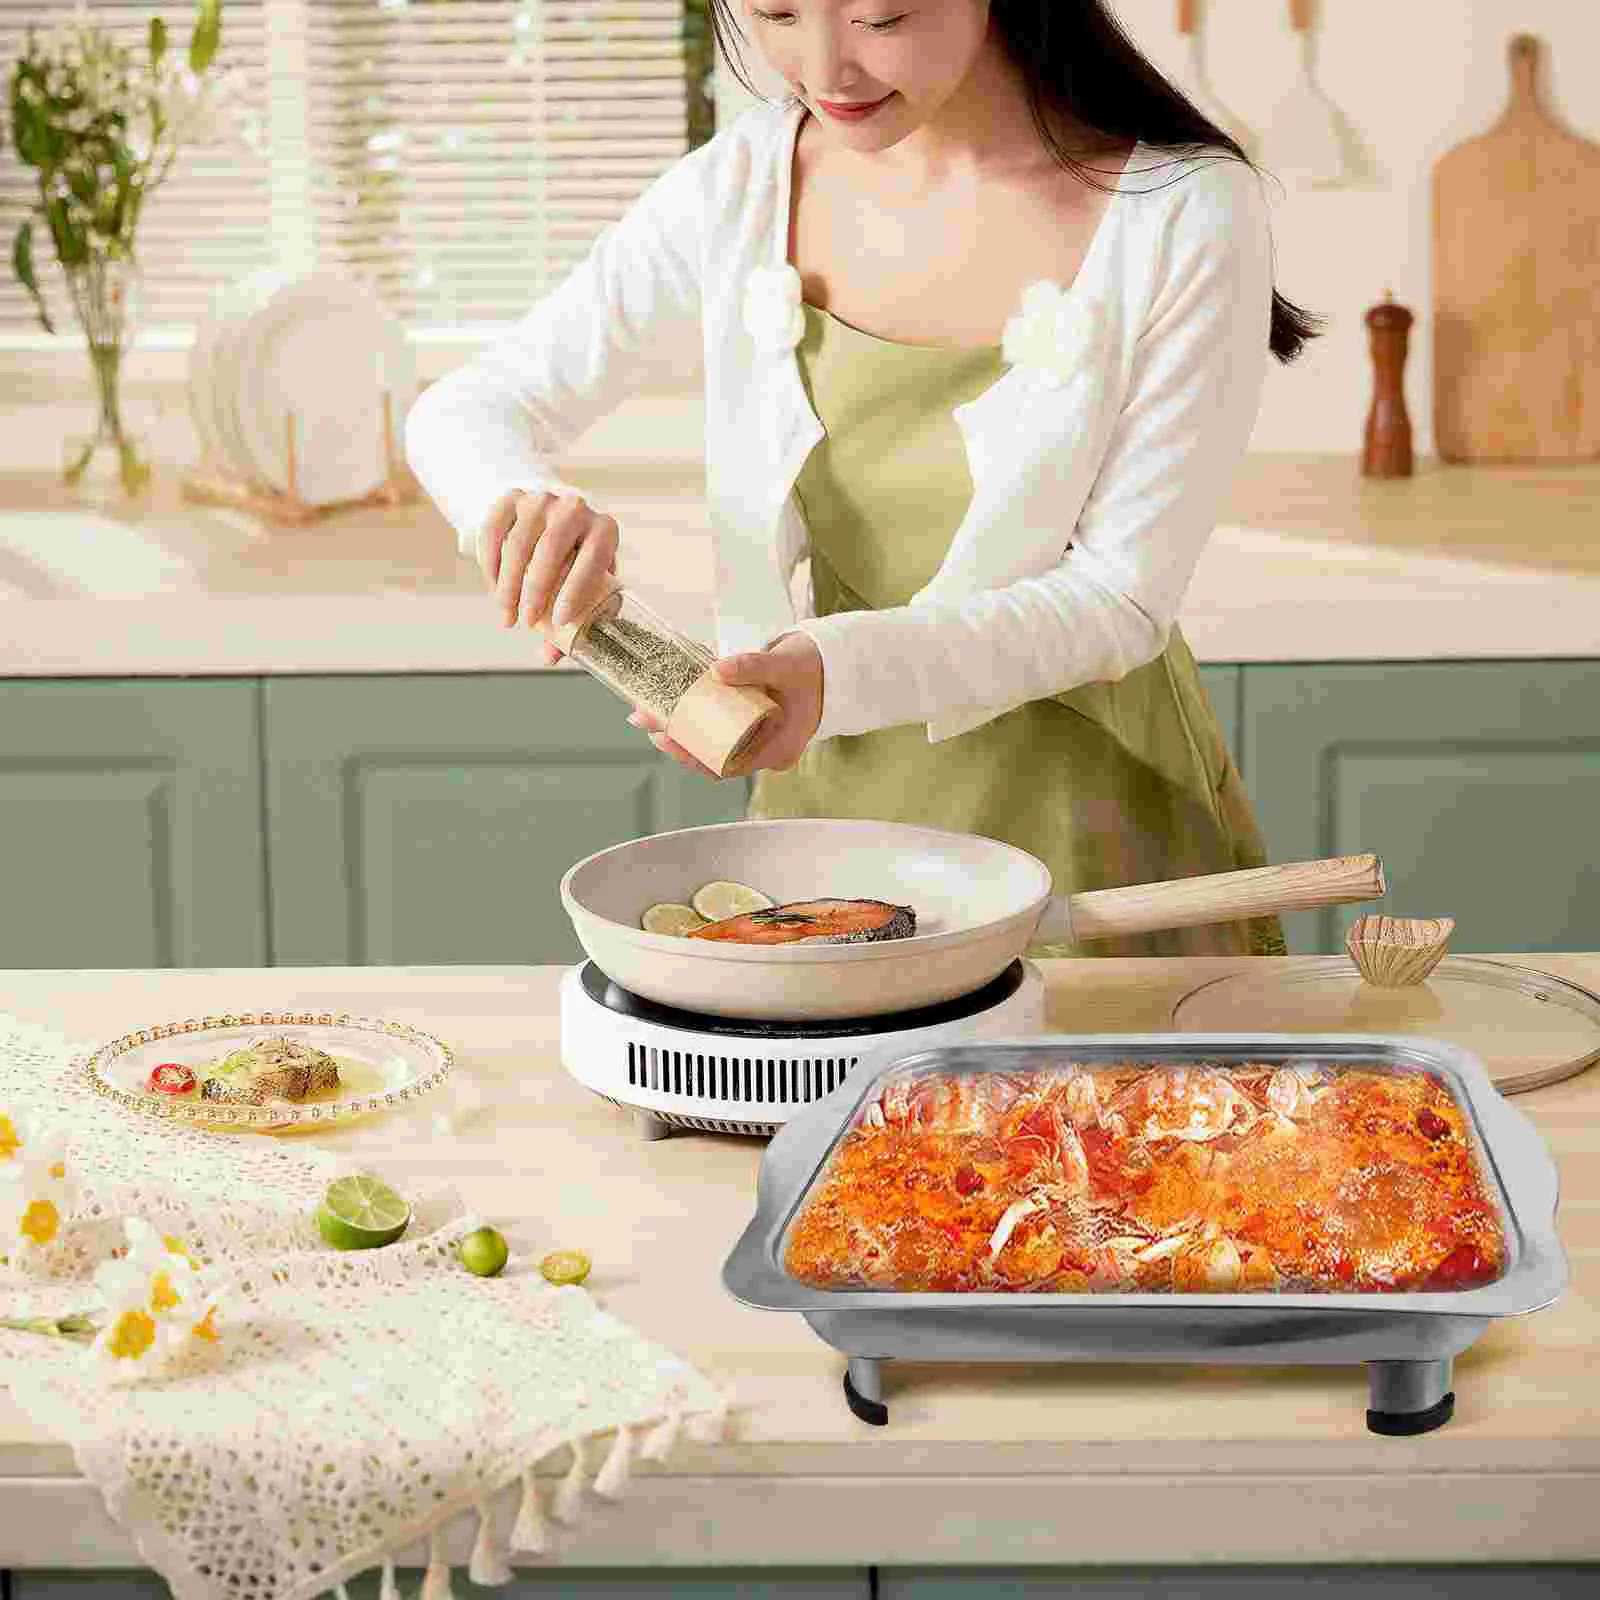 Chafing Dish Buffet Set Stainless Steel Rectangular Chafers Cover Lid Buffet Server Food Warmer Catering Pan Hot Steam